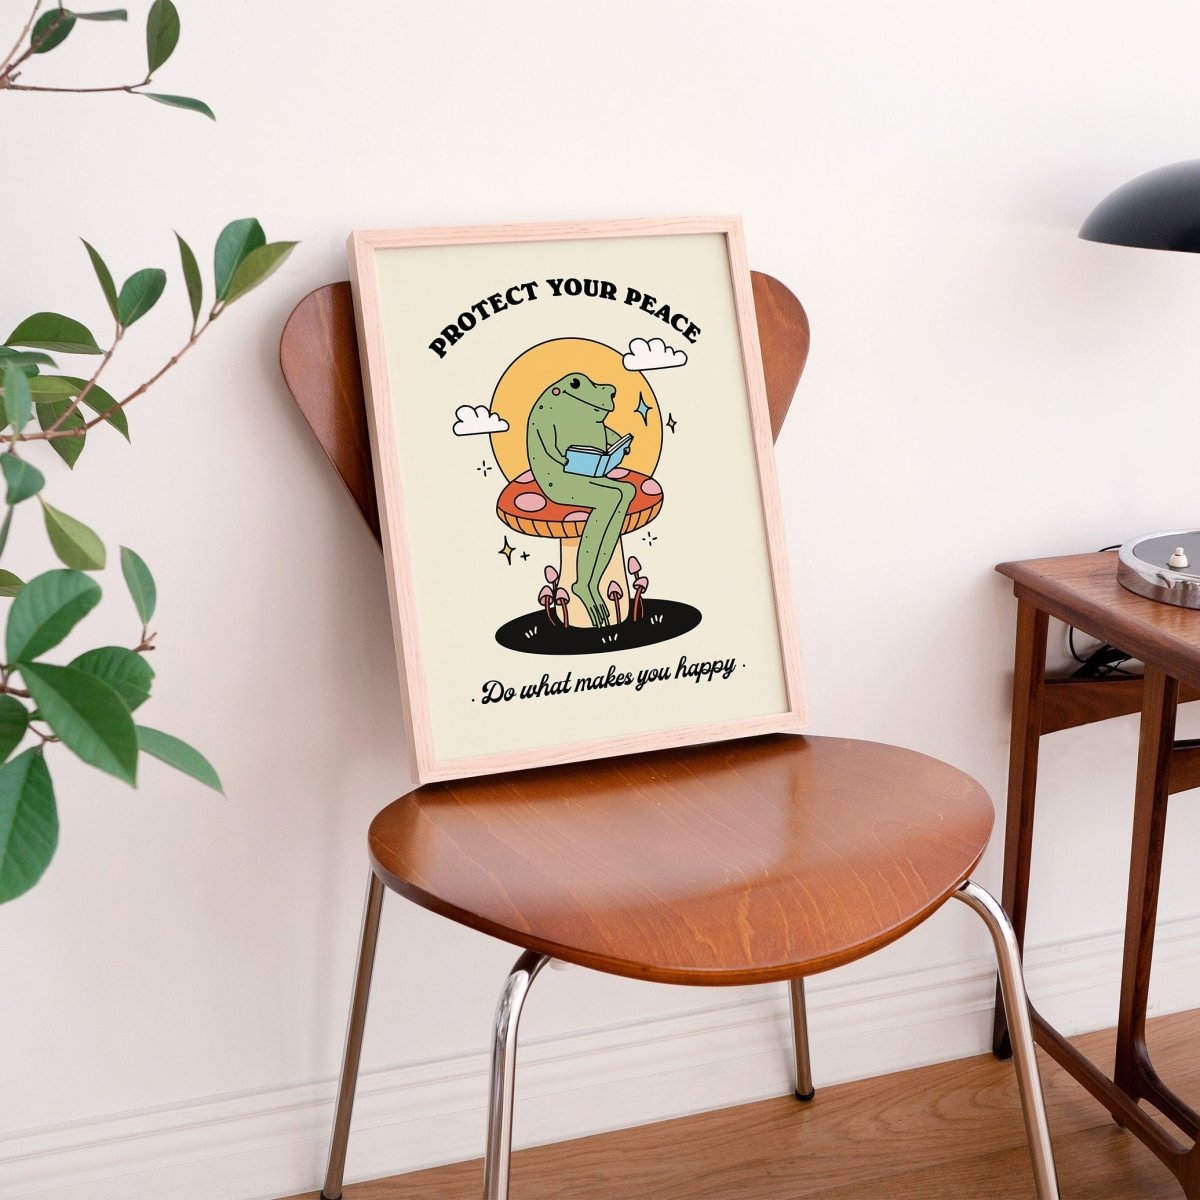 'Protect Your Peace' Frog Print - Art Prints - Kinder Planet Company